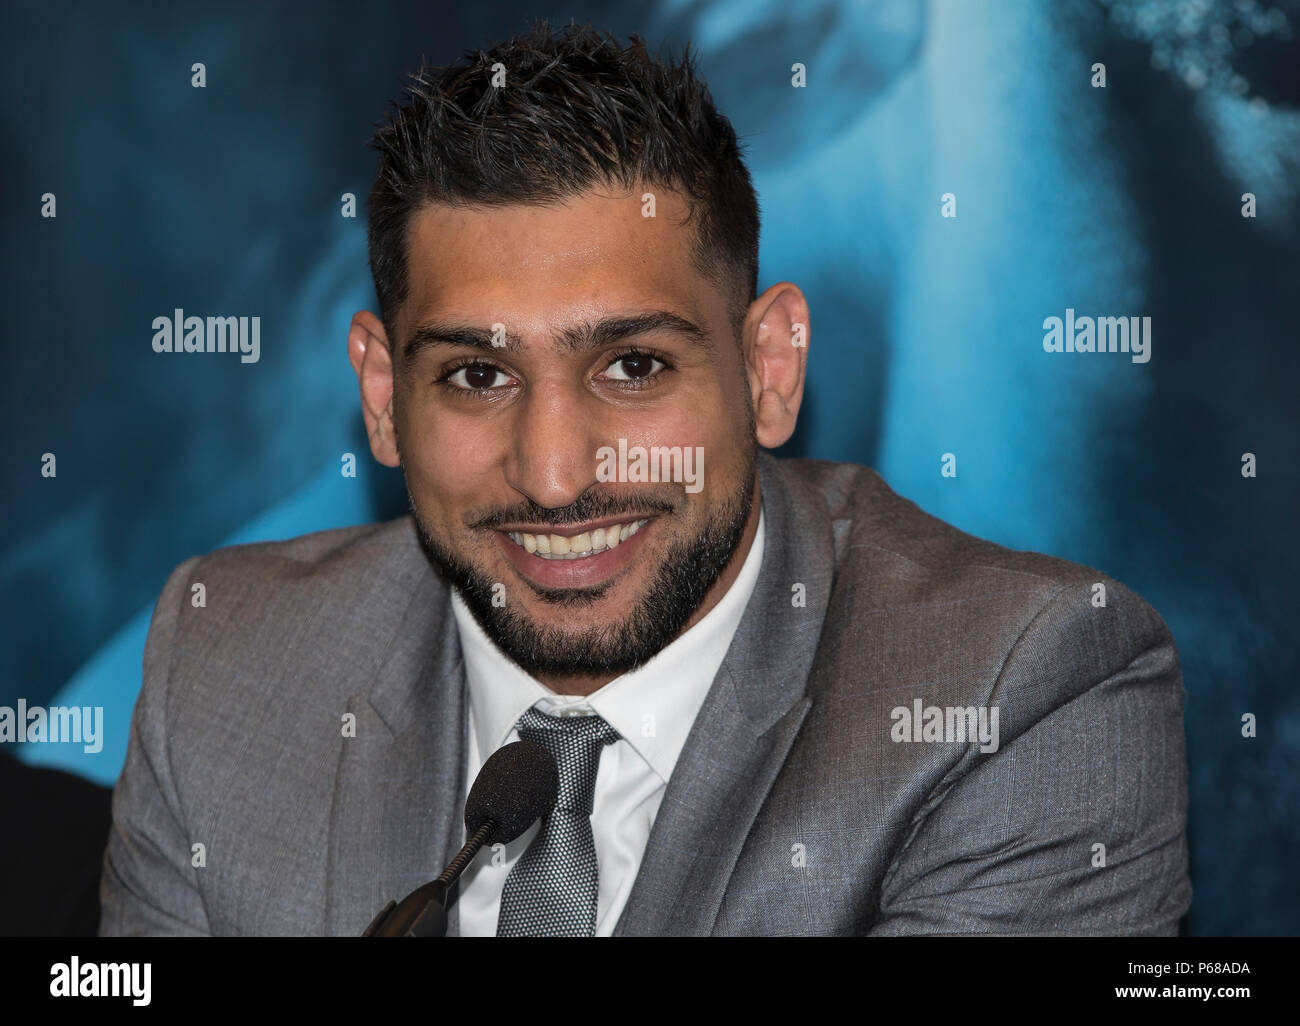 Amir Khan Press Conference - Amir Khan Boxer - Amir Khan v Samuel Vargas press conference in association with Eddie Hearn and Matchroom Boxing. Stock Photo